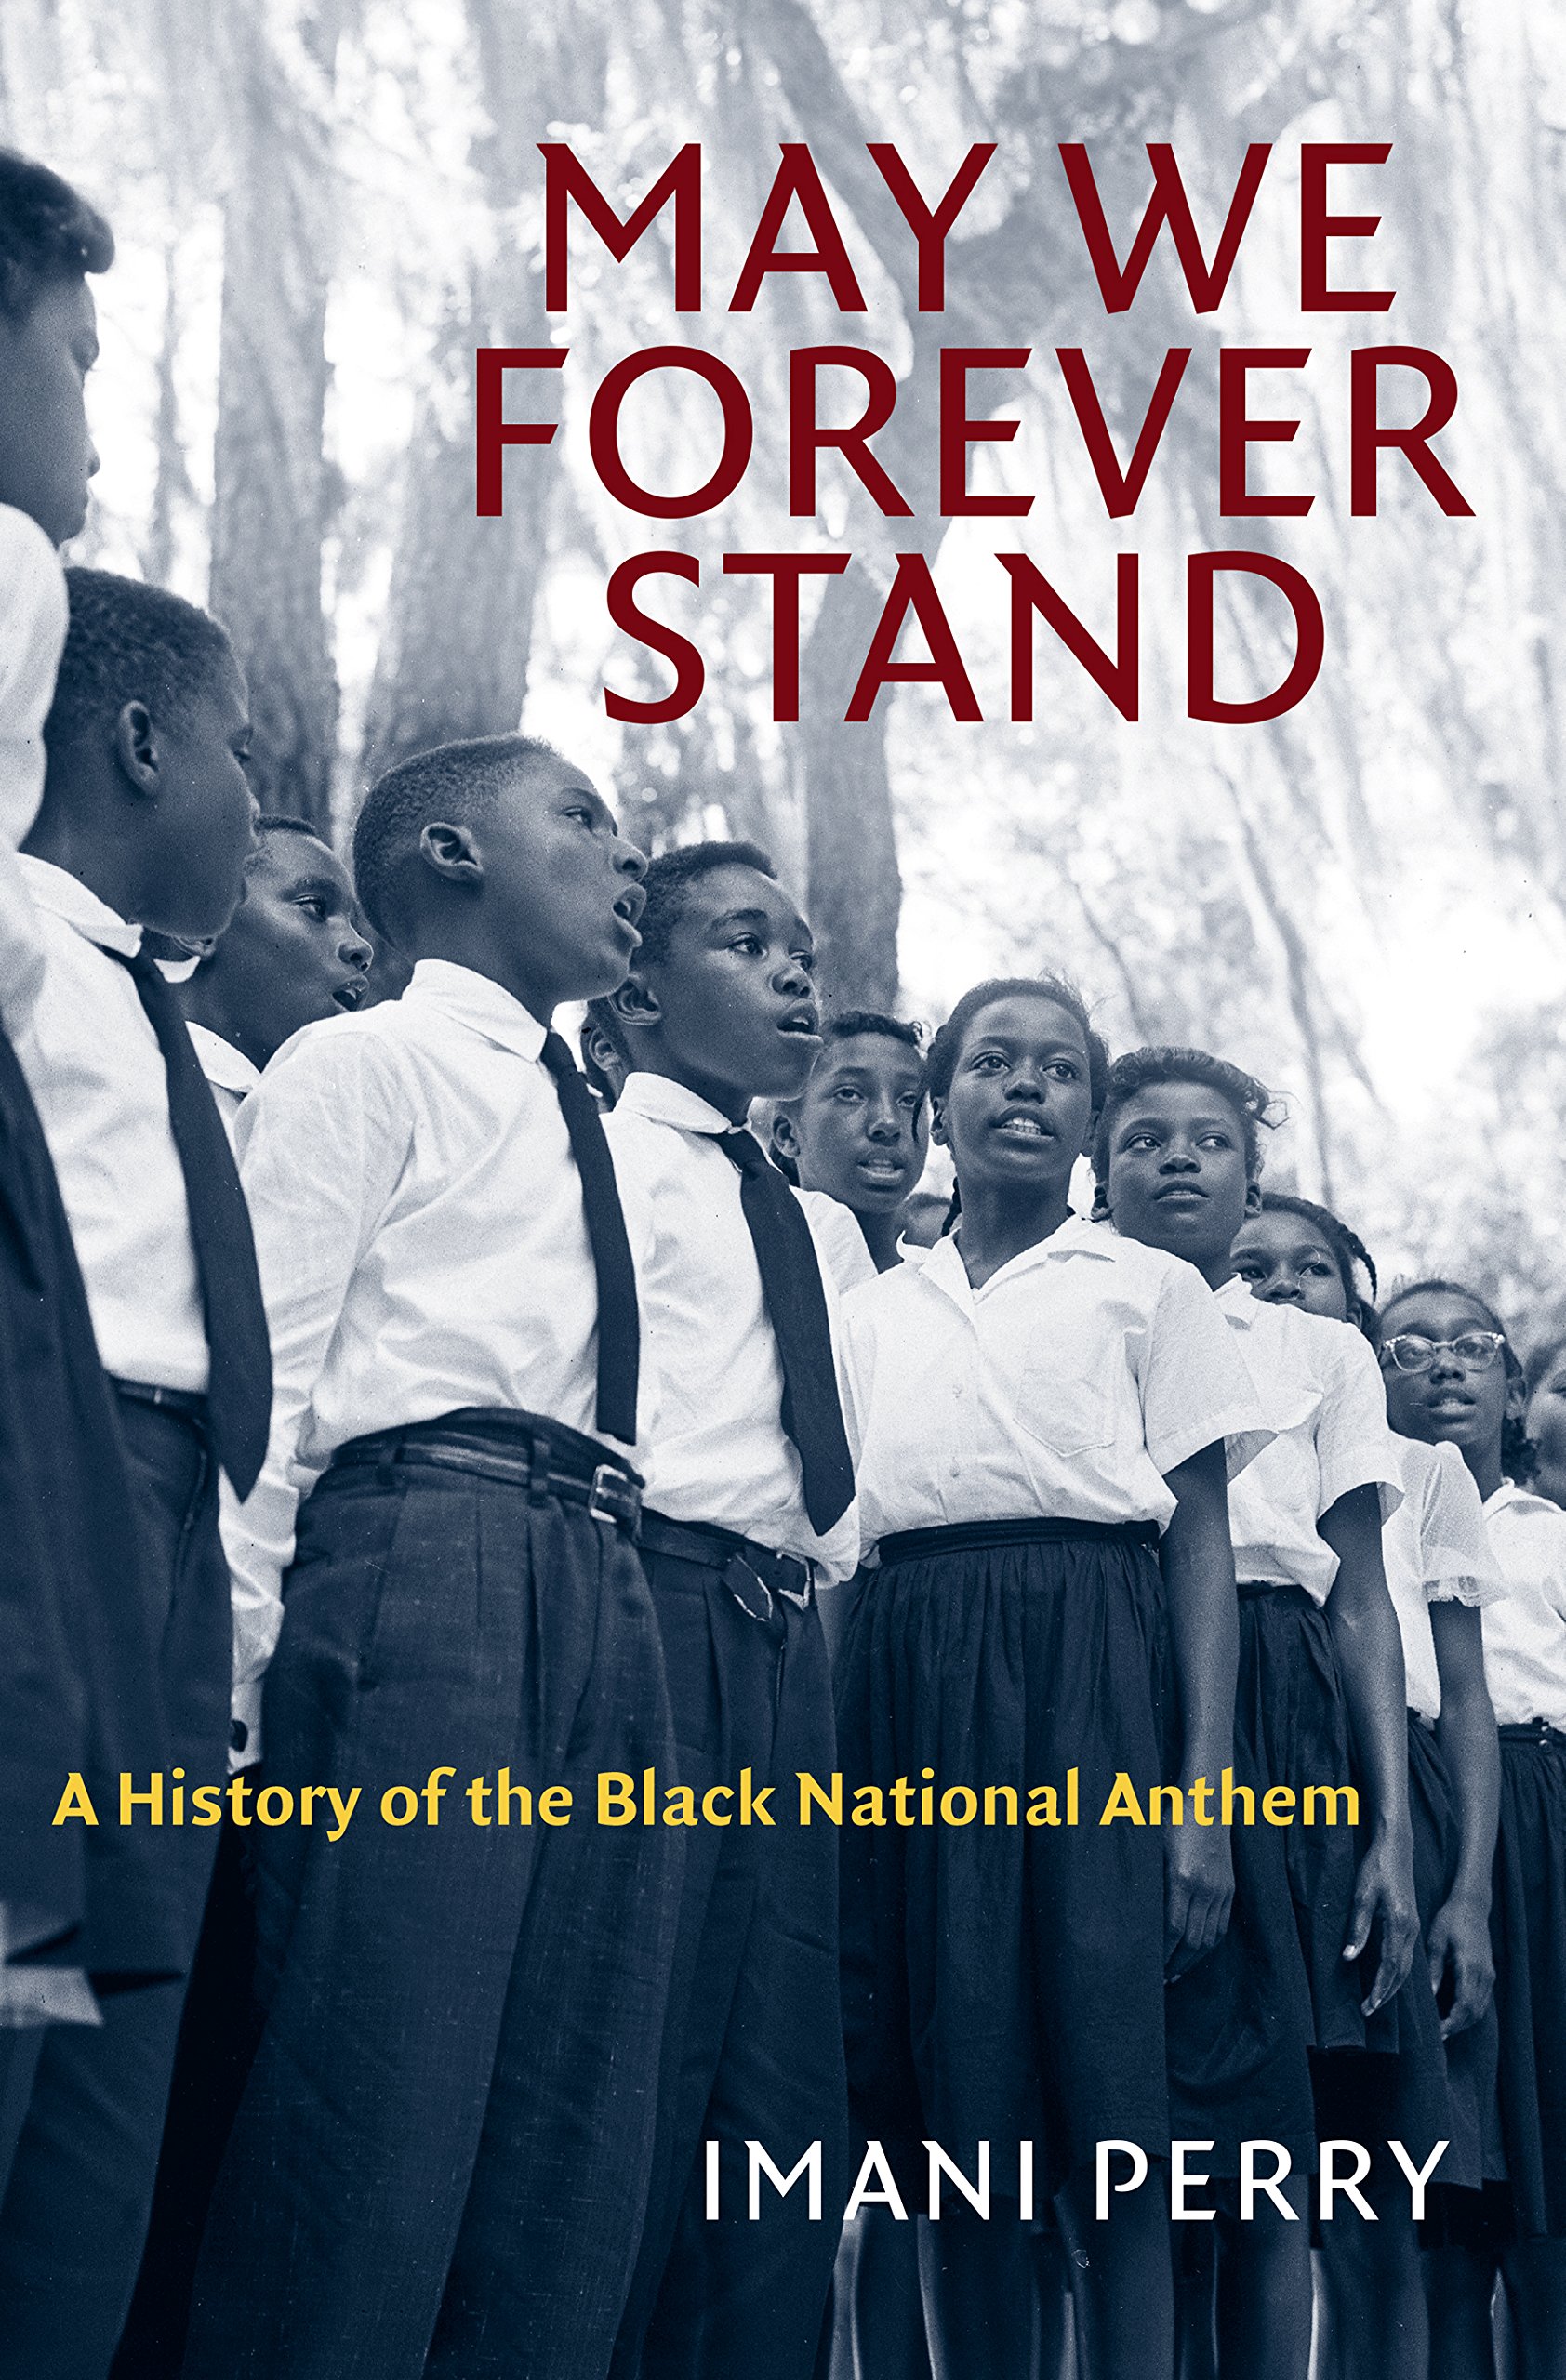 May We Forever Stand: A History of the Black National Anthem